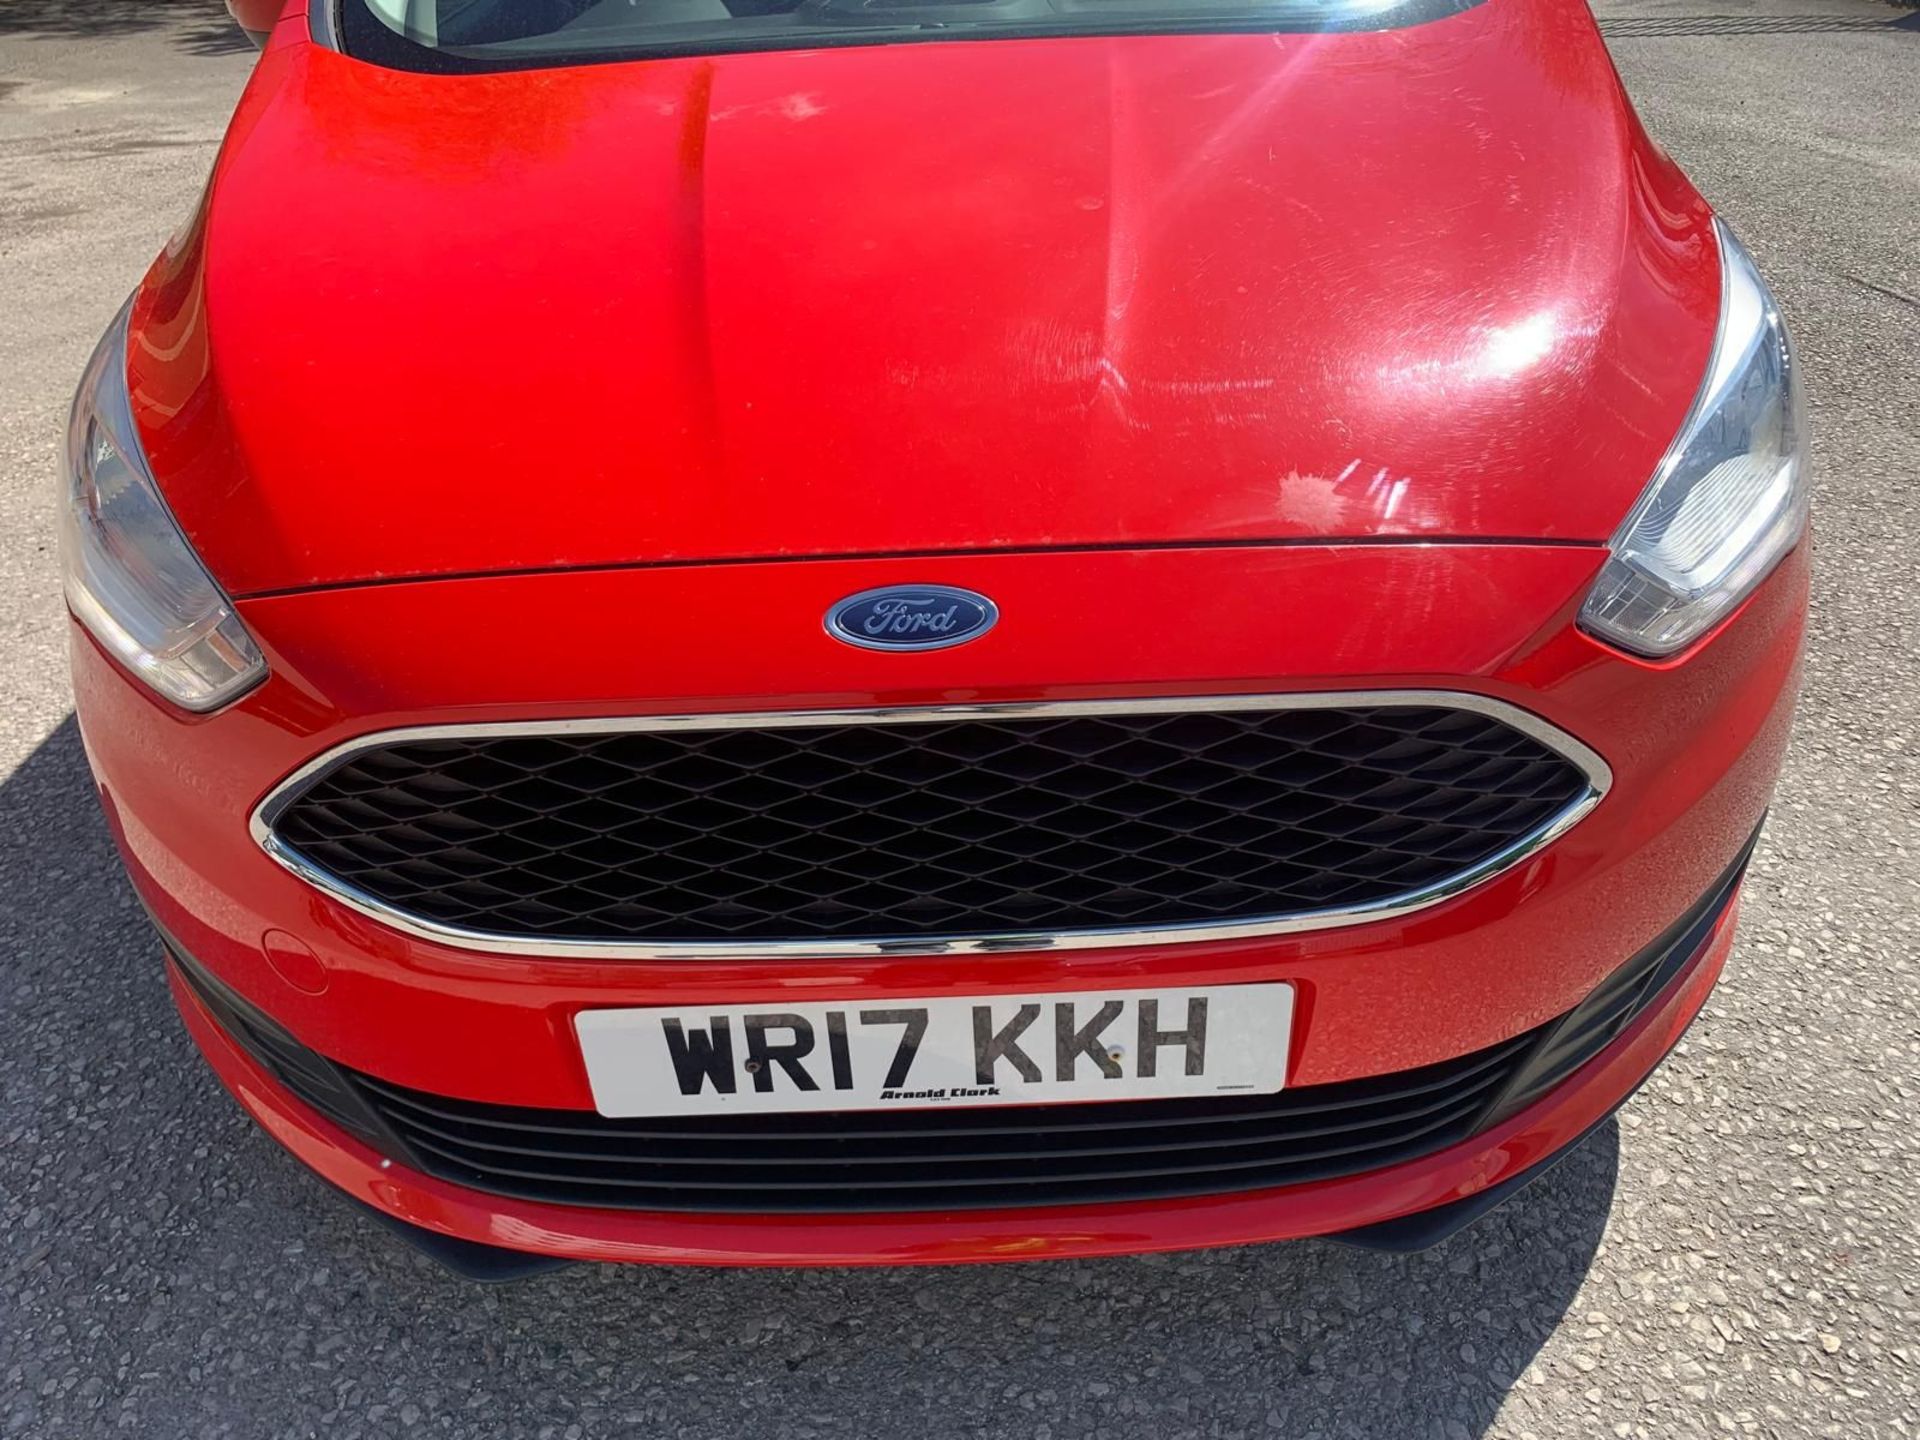 WR17 KKH FORD C-MAX. MOT Expiry: 09/10/2024 First Registered 31/03/2017 Petrol, Red - Image 2 of 10